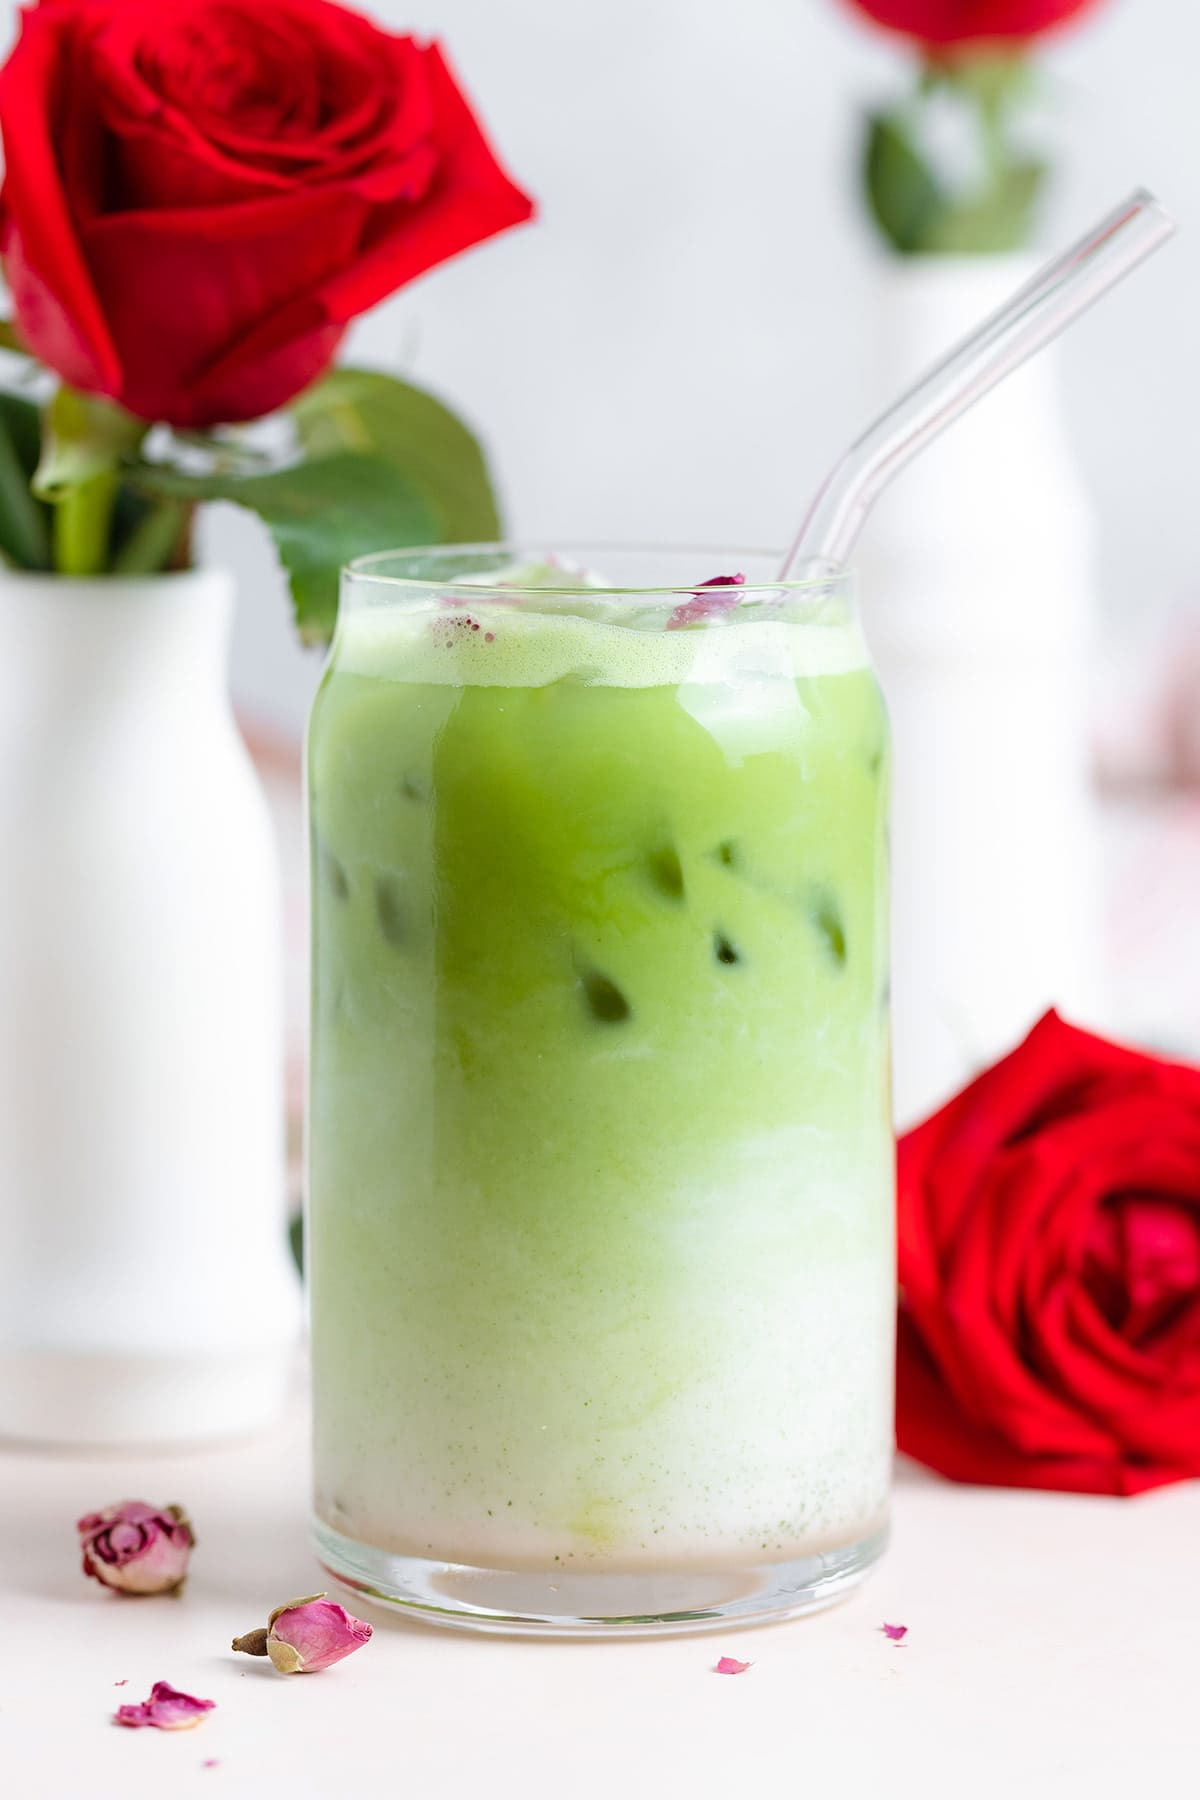 Green matcha latte in a tall glass with a glass straw with red roses around the glass.